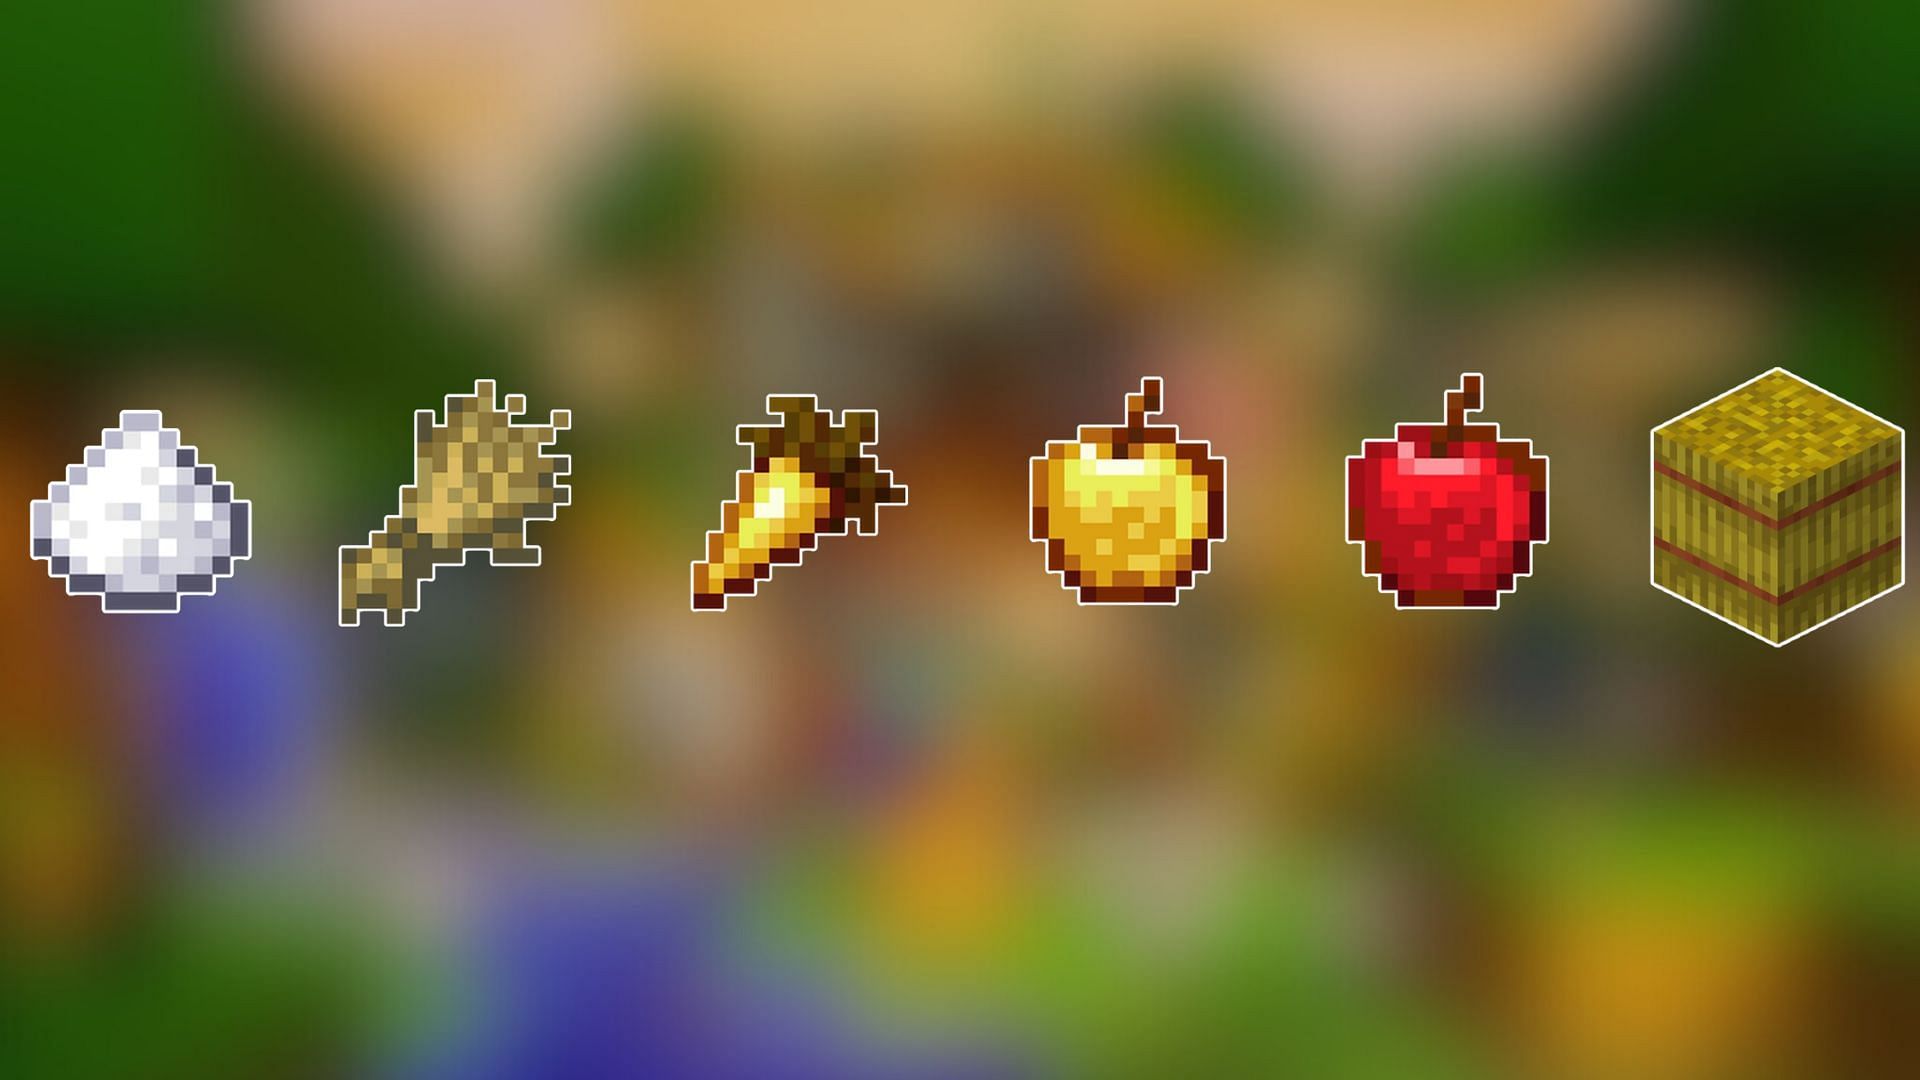 All the food items horses can eat in Minecraft (Image via Mojang Studios)